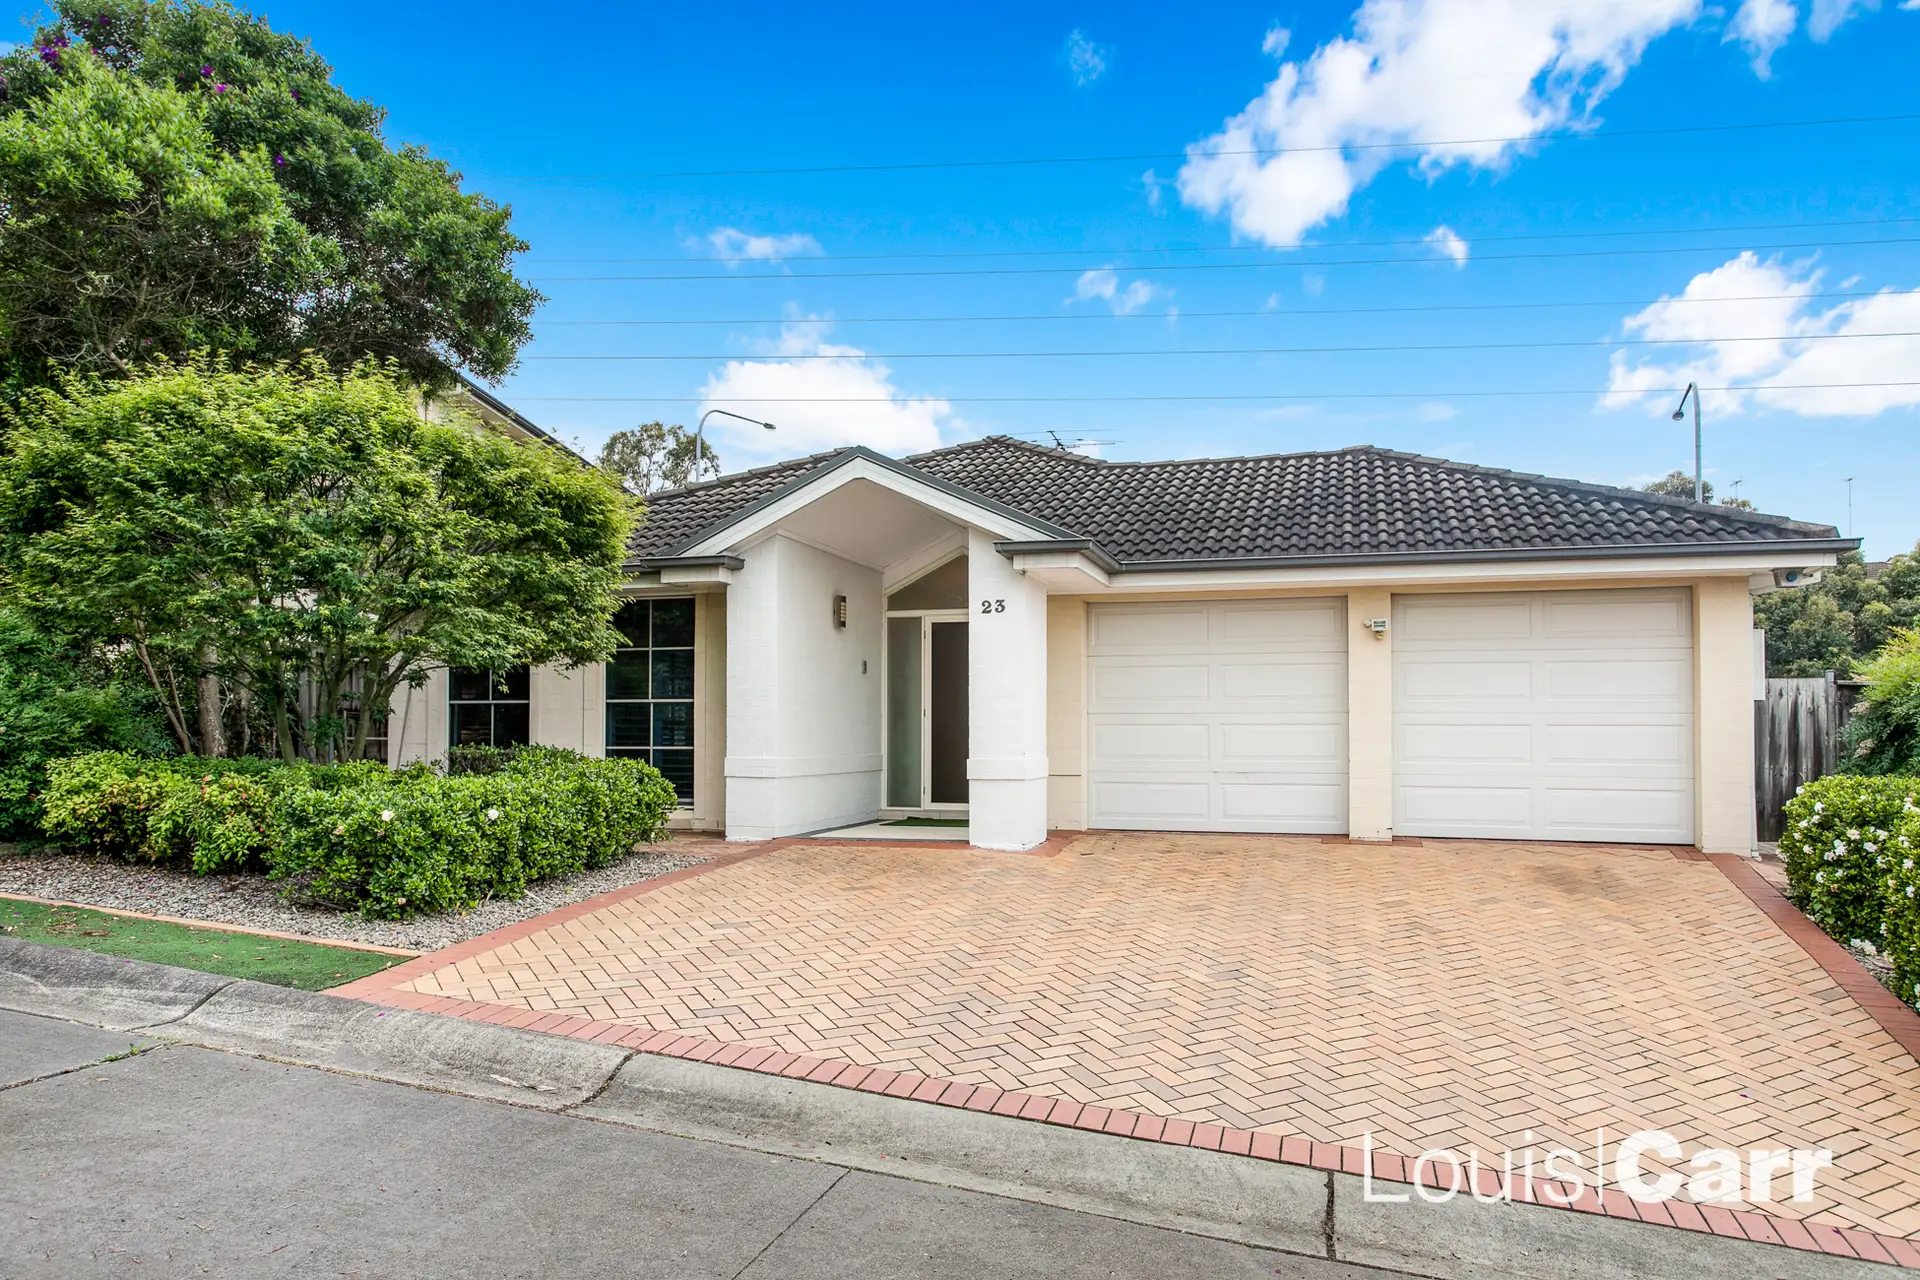 Photo #1: 23 Mary Ann Place, Cherrybrook - Sold by Louis Carr Real Estate